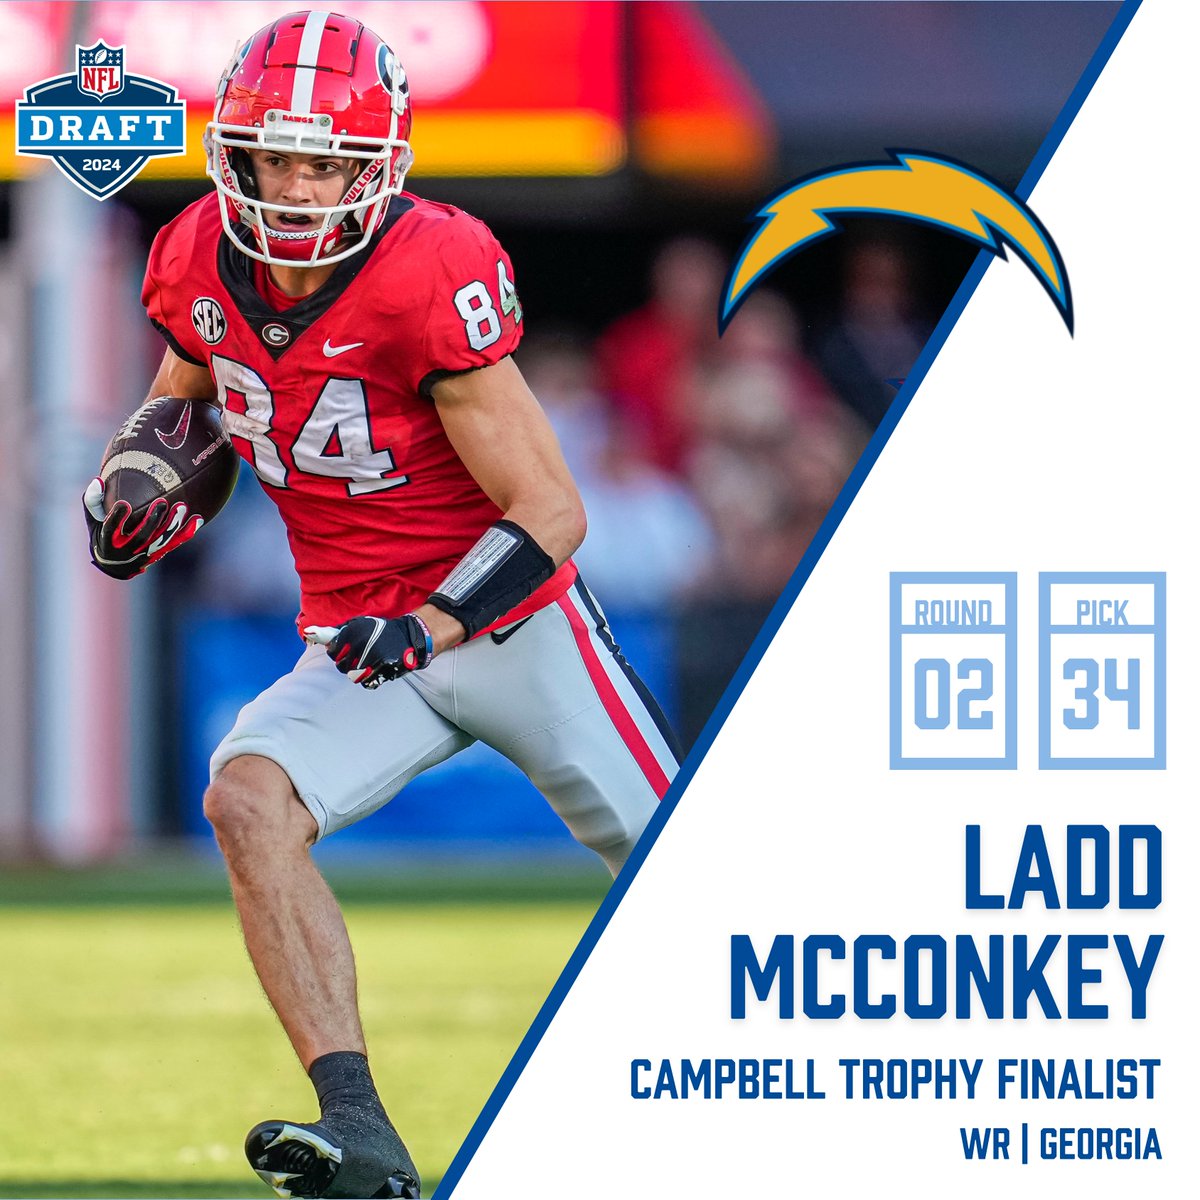 We might be a little biased, but we think 'Herbert to McConkey' sounds electric!⚡️Congrats, Ladd -- the newest weapon for 2019 #CampbellTrophy recipient Justin Herbert! #BoltUp